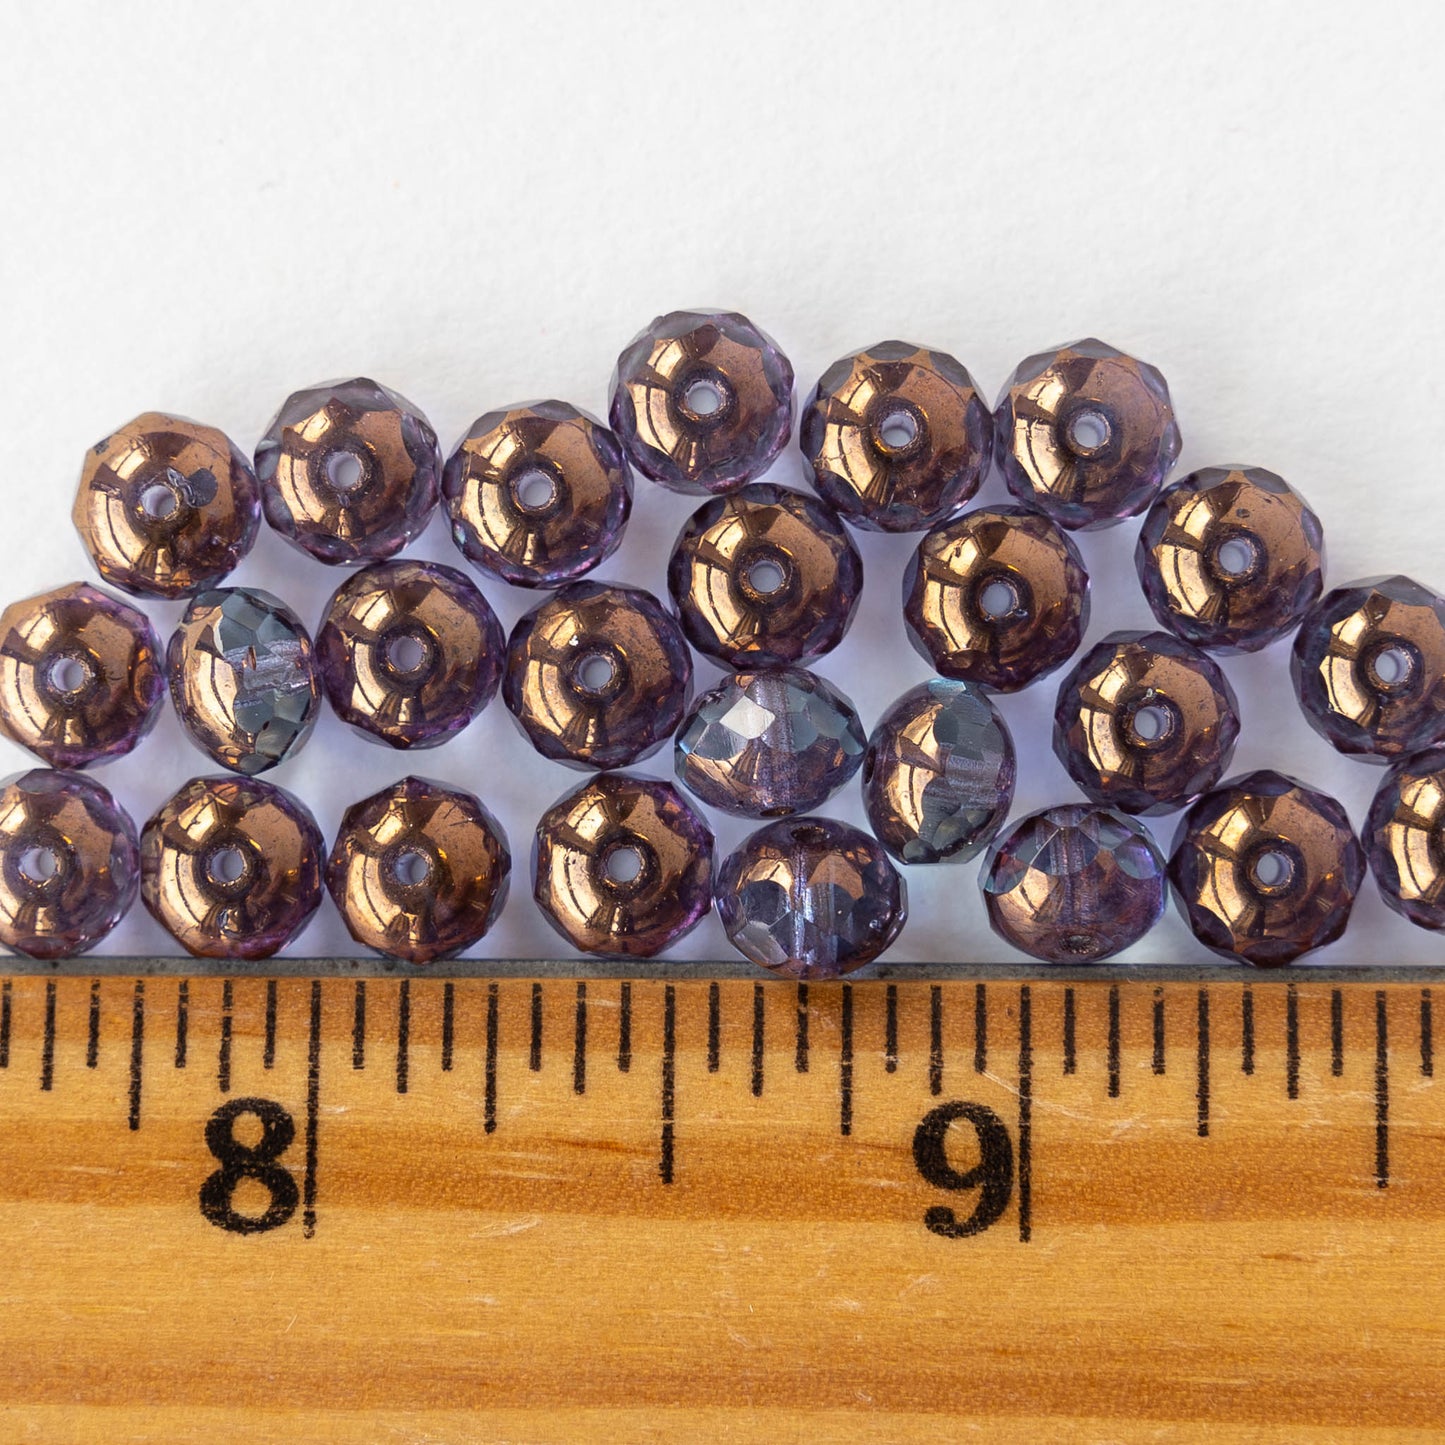 5x7mm Rondelle Beads - Light Blue with Bronze Edging  - 25 Beads